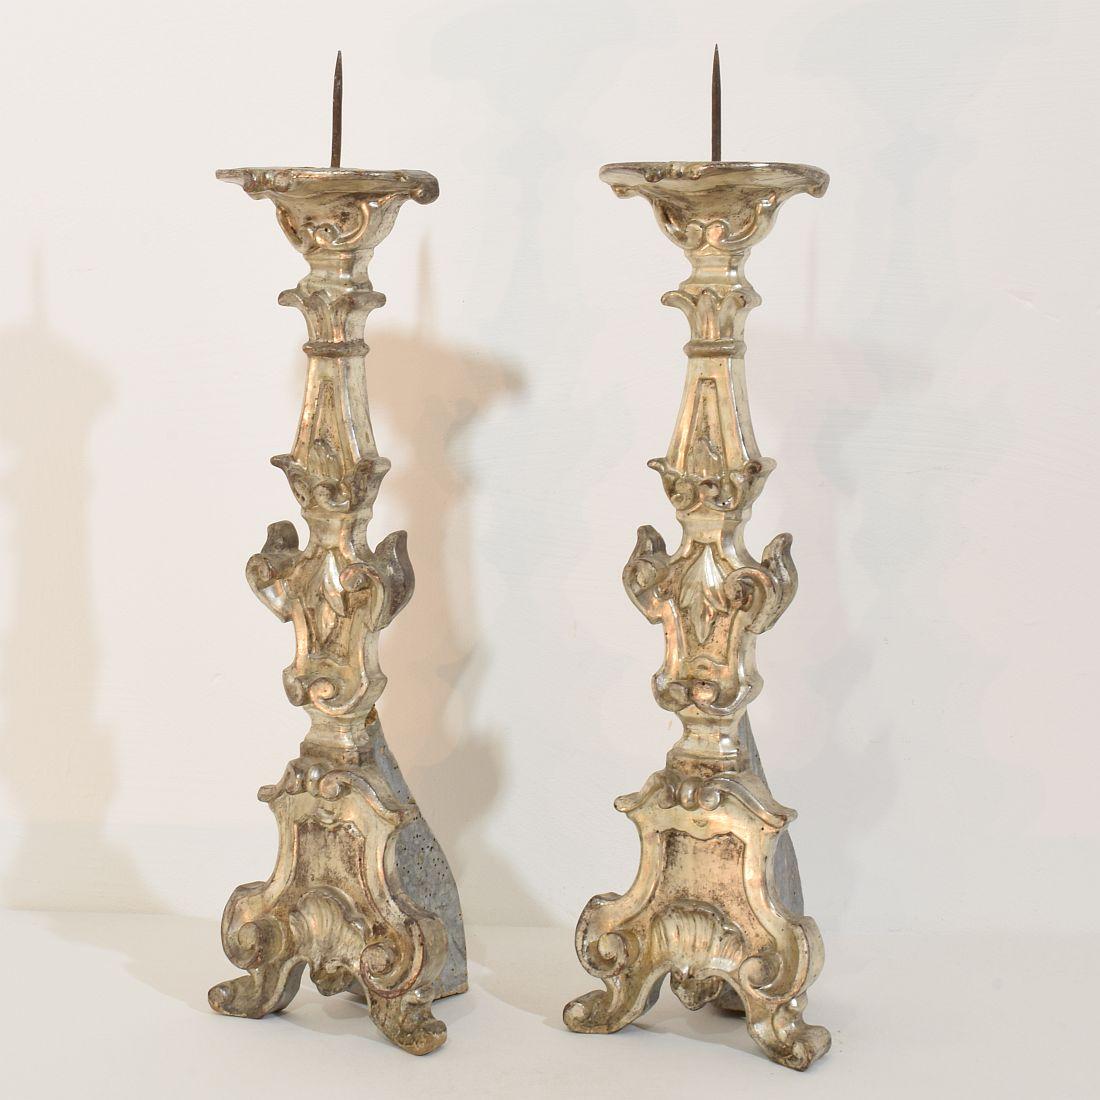 Couple of 18th Century Italian Baroque Carved Wooden And Silvered Candlesticks In Good Condition For Sale In Buisson, FR